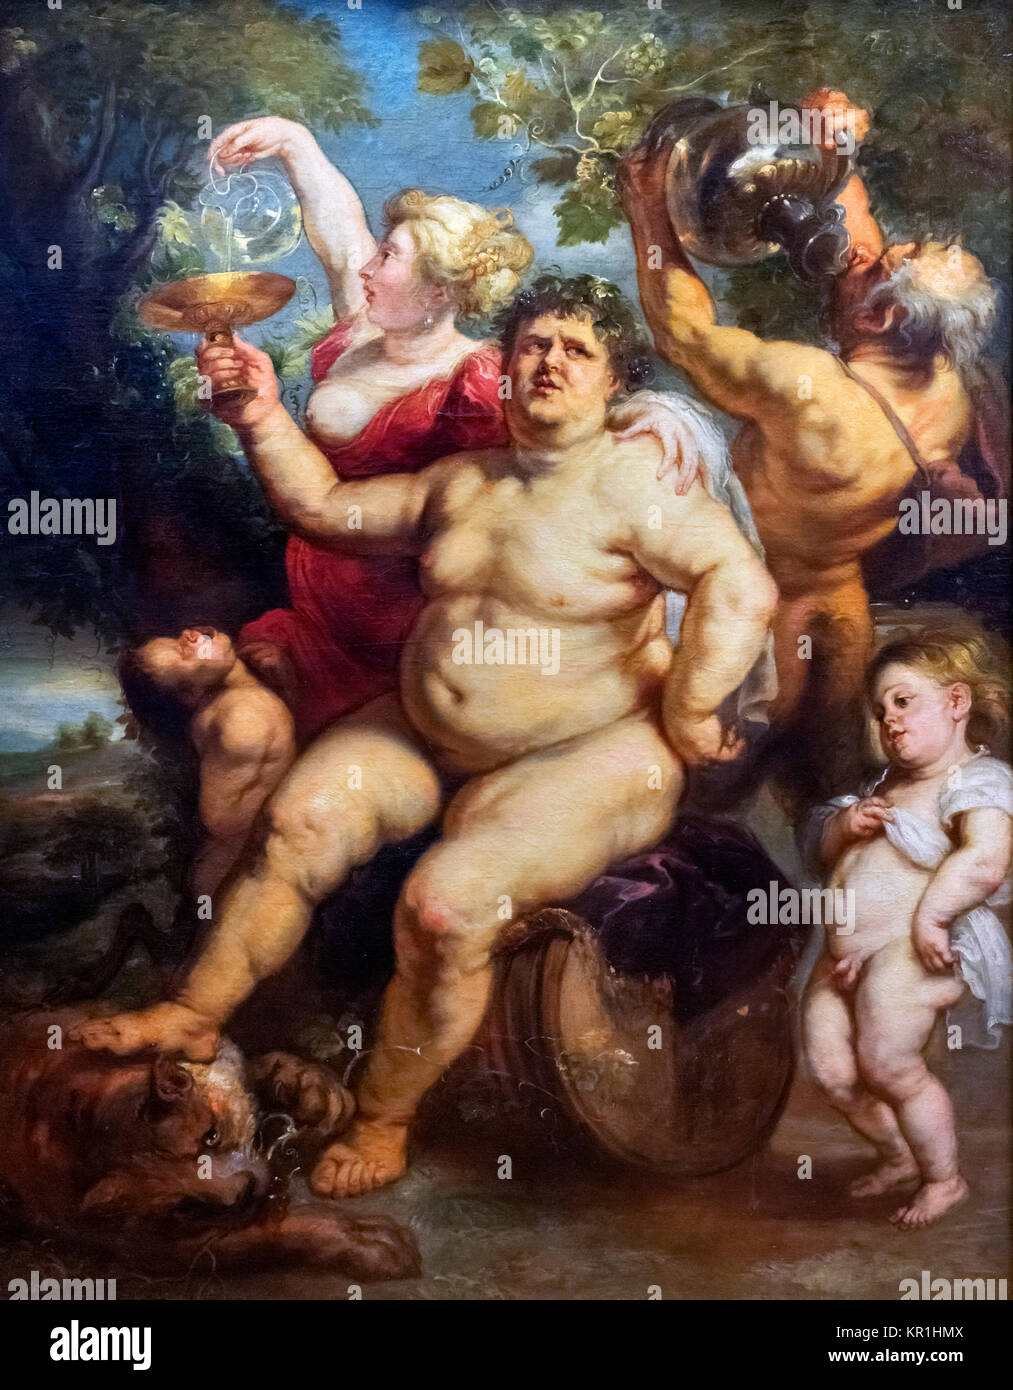 Bacchus. Painting entitled Bacchanalia by Peter Paul Rubens (1577-1640), oil on canvas, c.1635-40. It depicts Bacchus (or Dionysus), the God of Wine. Stock Photo